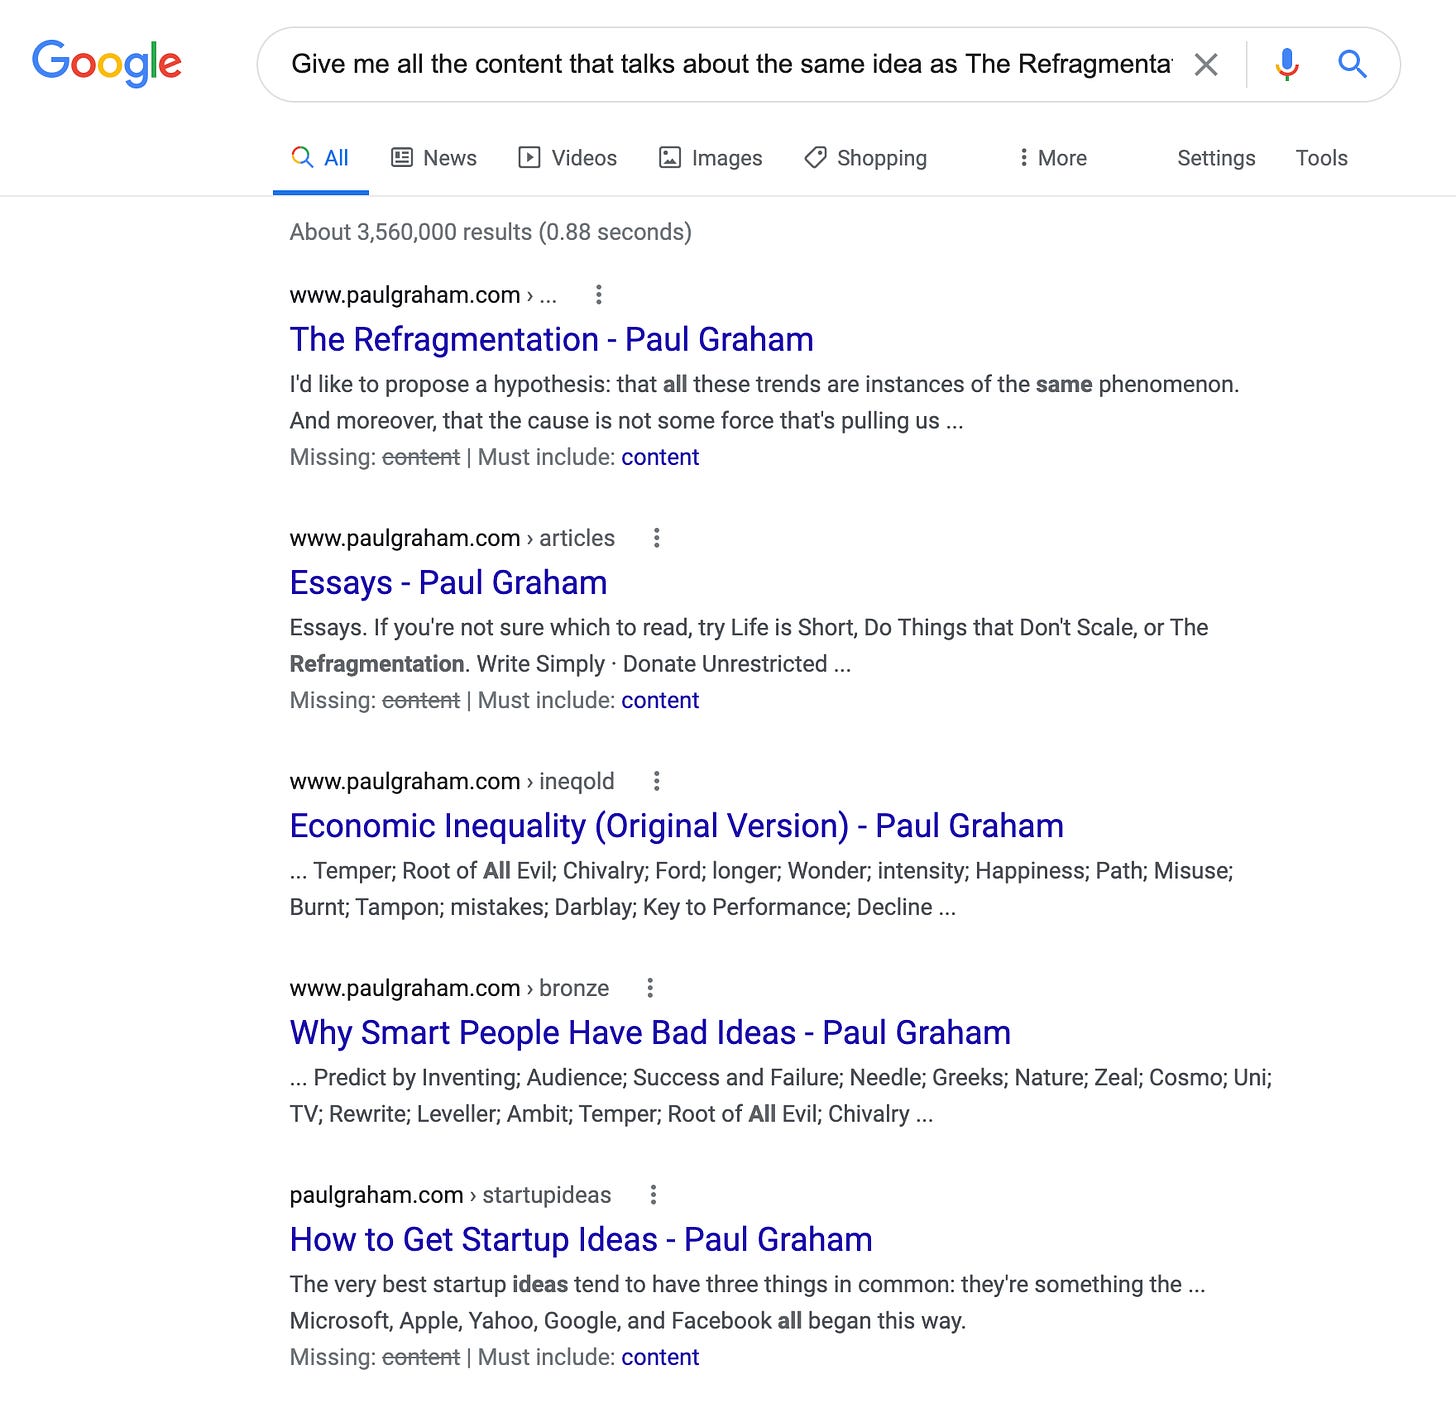 Google Query “Give me all the content that talks about the same idea as The Refragmentation by Paul Graham”